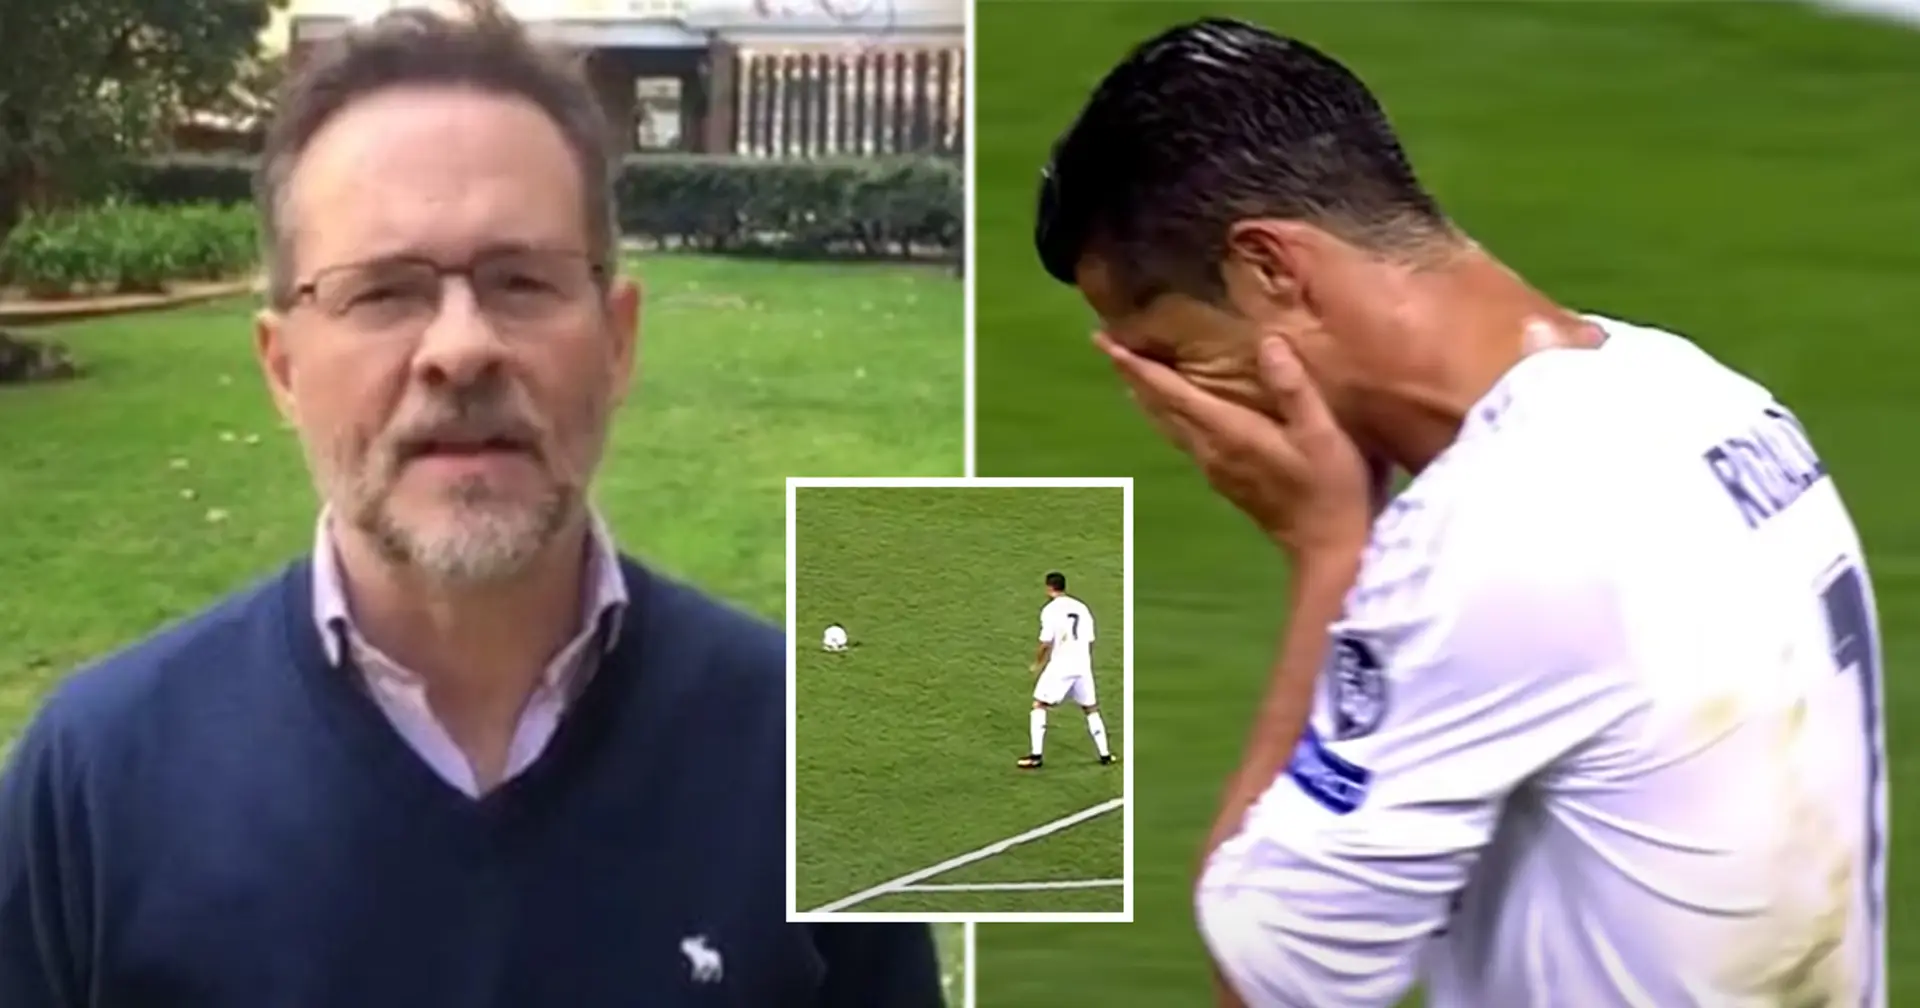 'He turned and told everyone he's exhausted': Journalist reveals story behind Ronaldo penalty in CL final